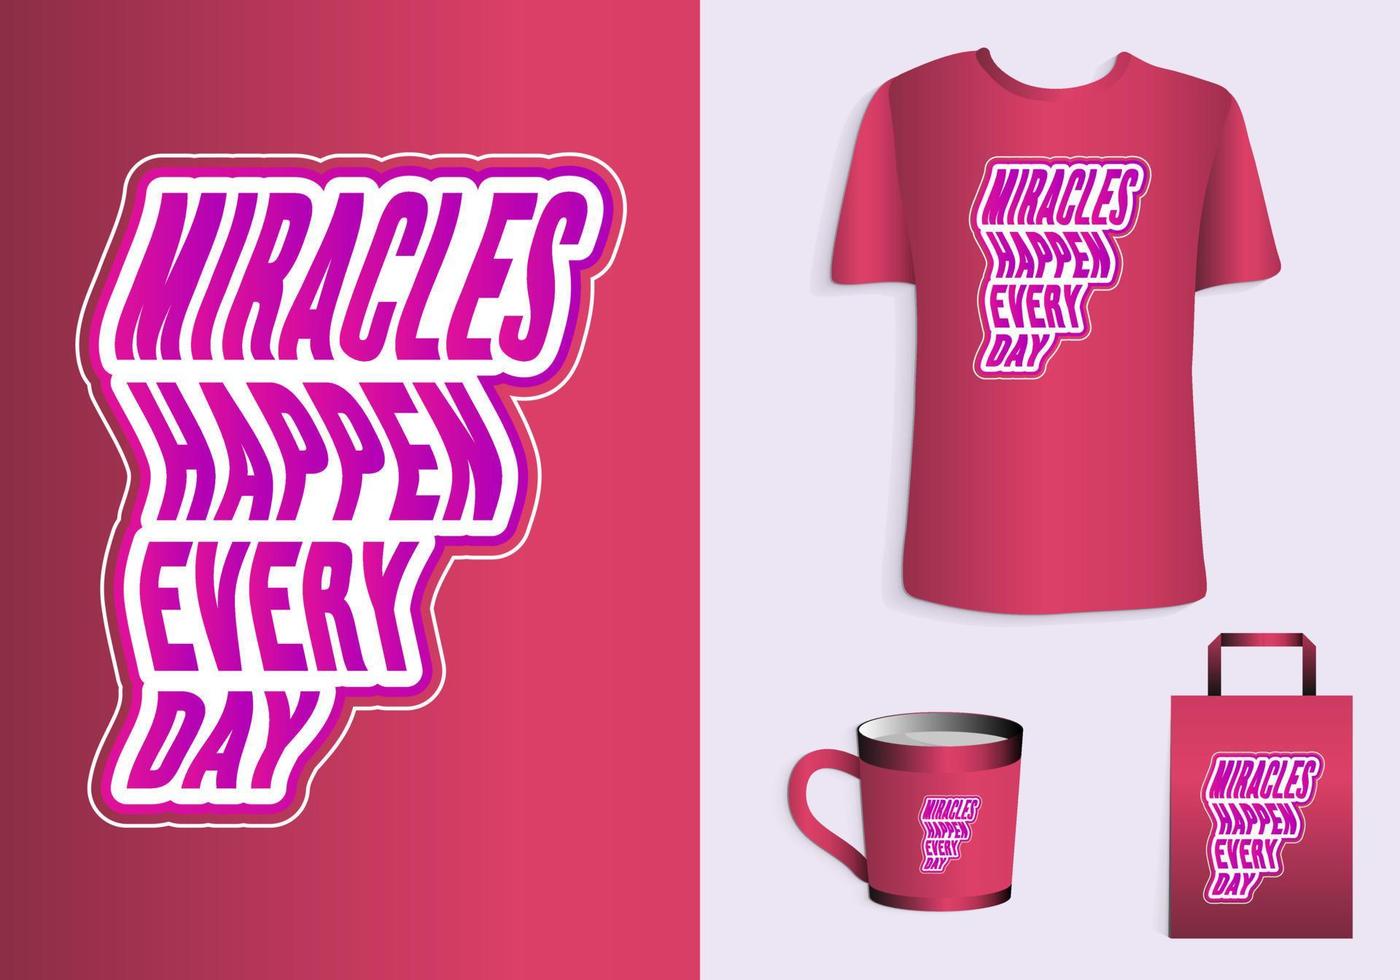 Miracles happen every day. Typography t-shirt, tote bag, and cup design for merchandise and print. Mock-up templates included vector